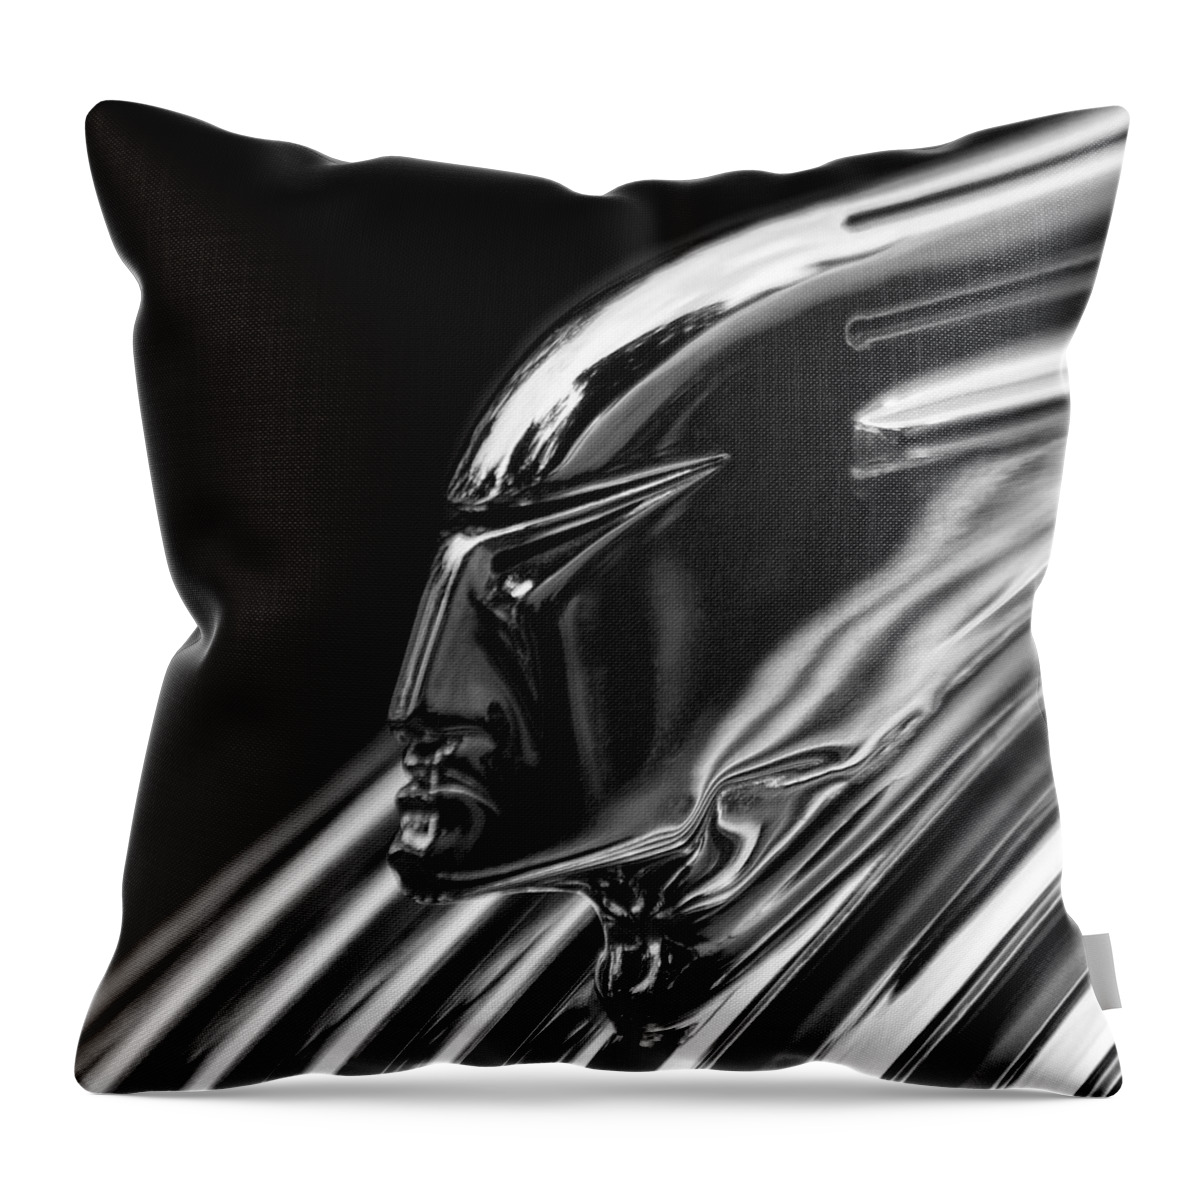 Pontiac Cheif 2 Throw Pillow featuring the photograph Pontiac Chief 2 by Wes and Dotty Weber